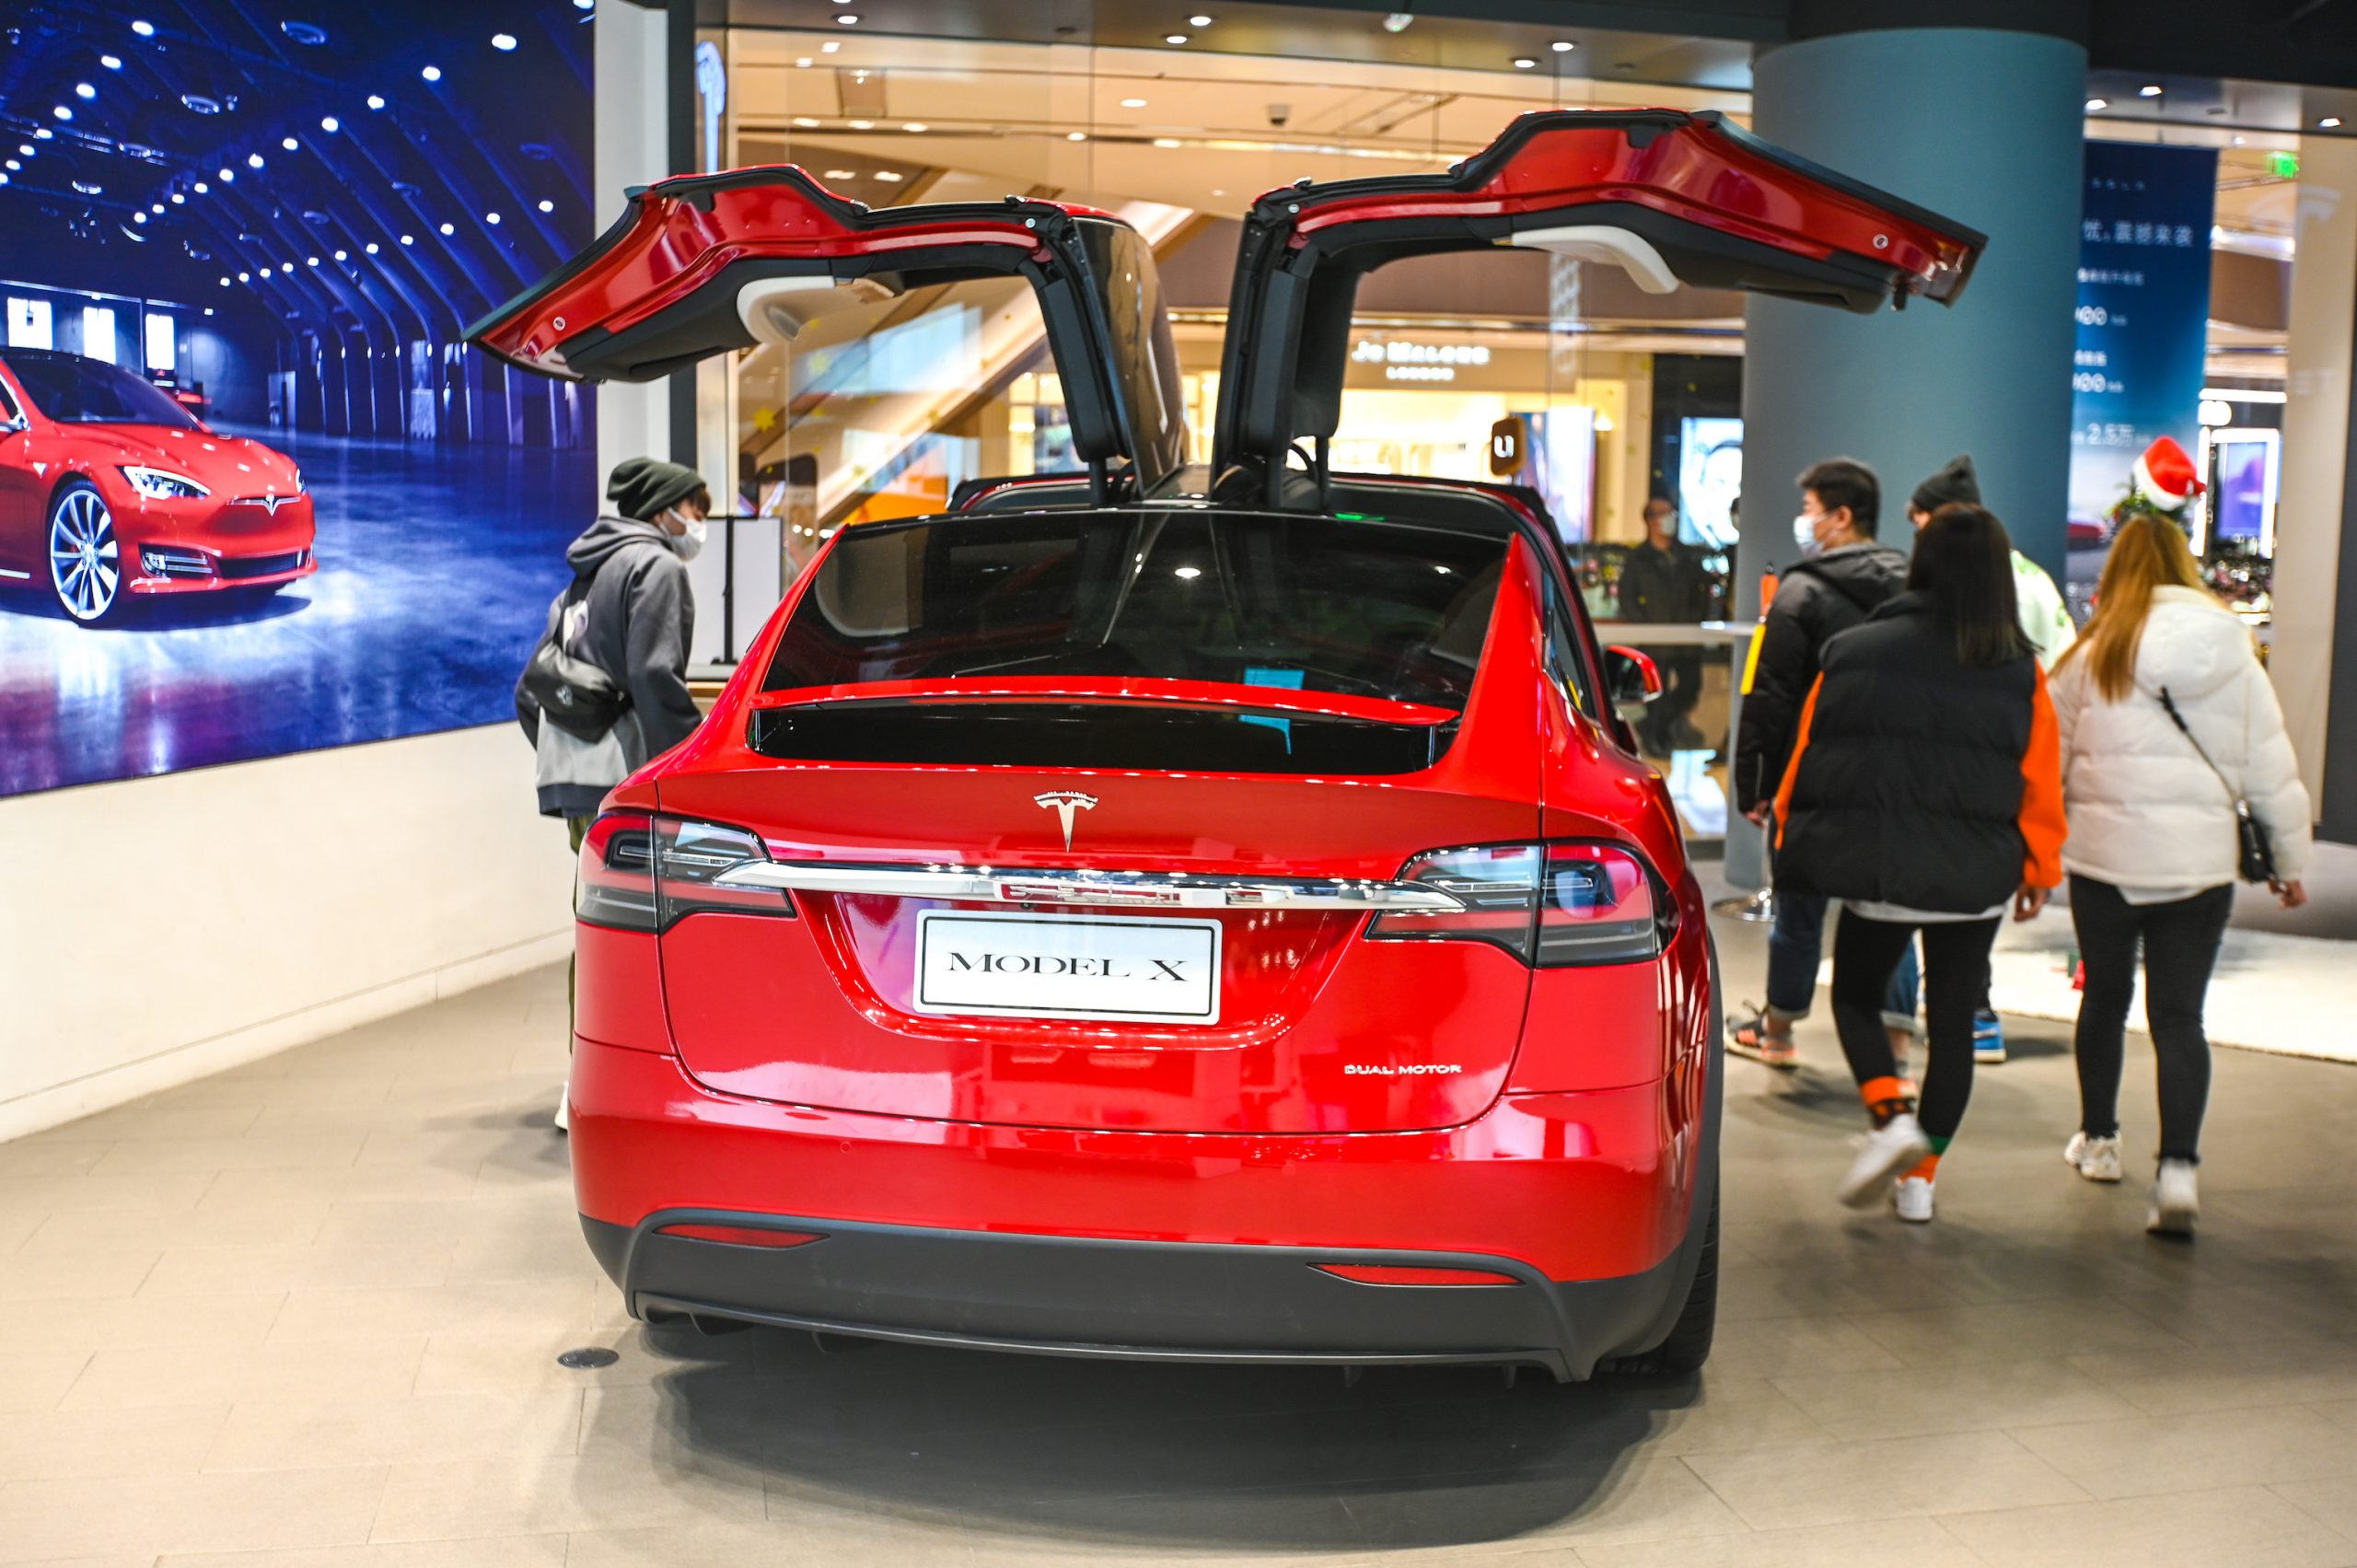 How Much Does a 2021 Tesla Model X Cost?